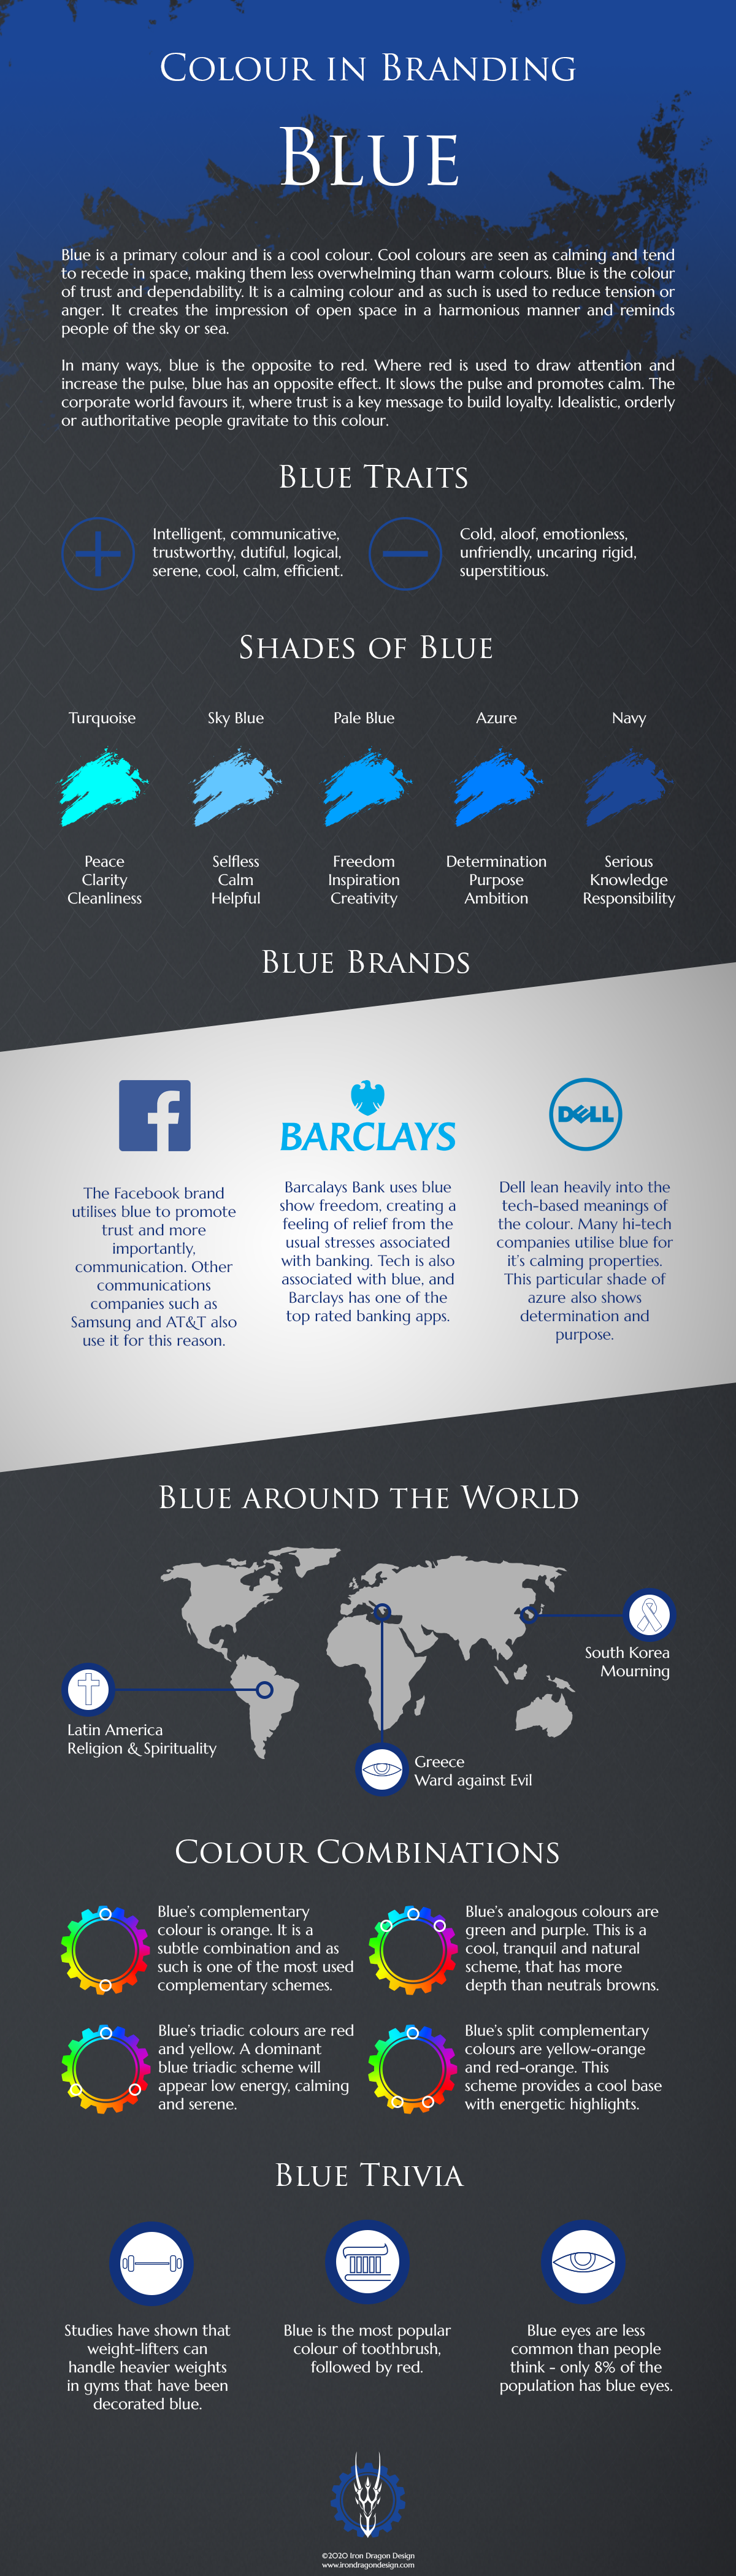 Colour in Branding Blue Psychology Infographic